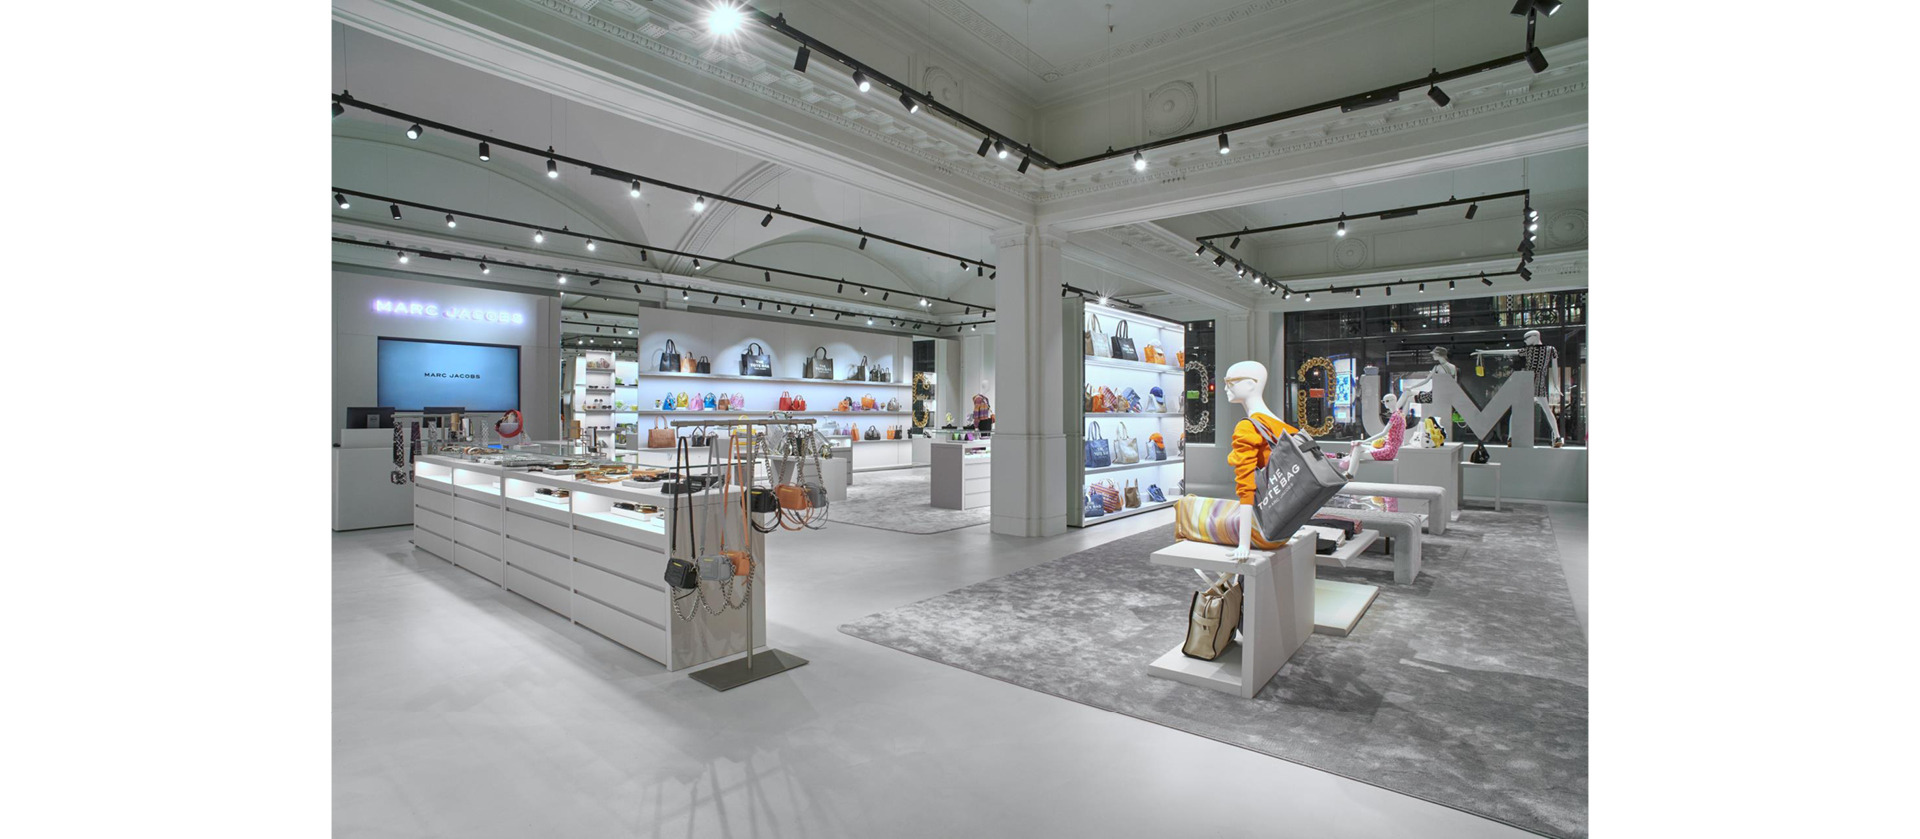 Marc Jacobs now open on Regent Street! - My Central London